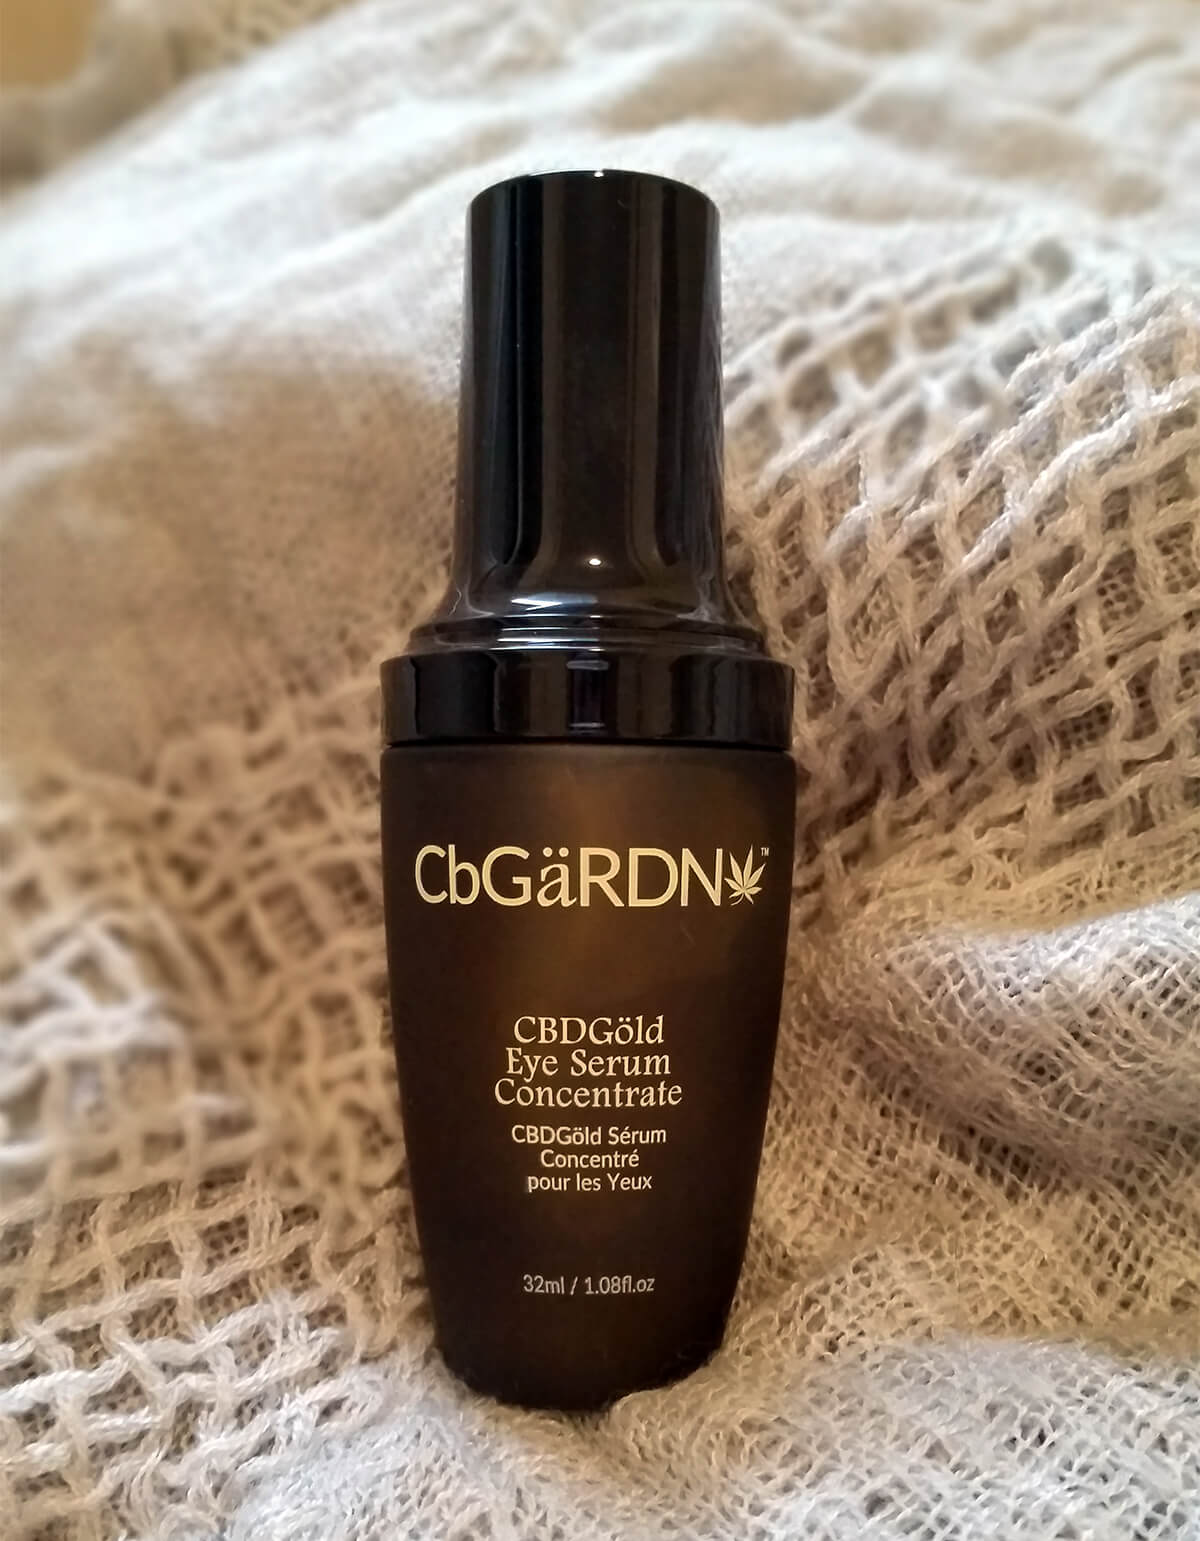 CBDGold Eye Serum Concentrate in bottle on blanket